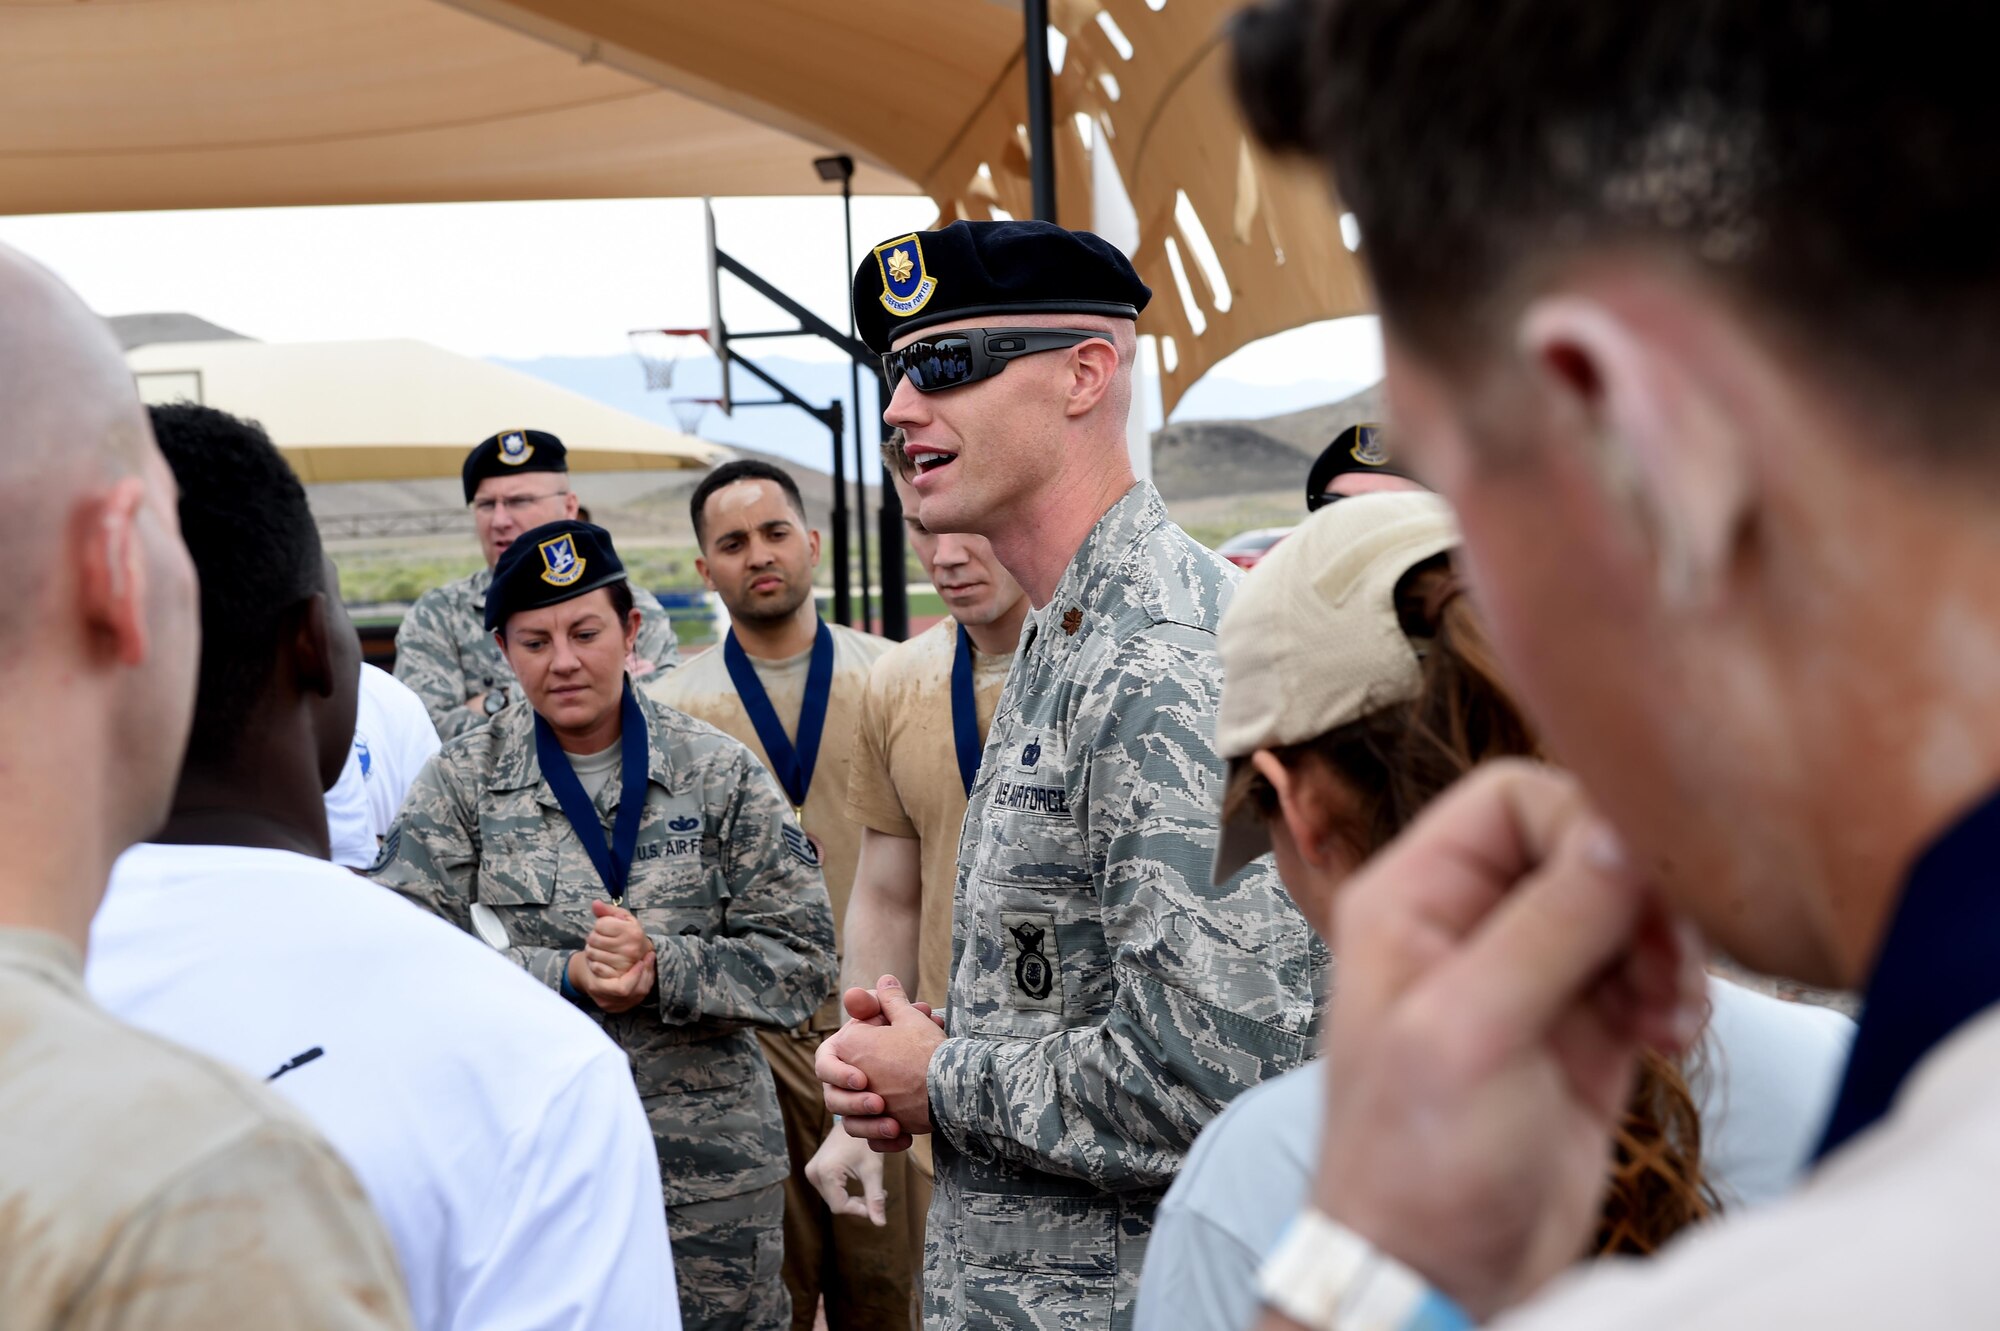 Maj. Michael 799th Security Forces Squadron commander explains the importance of National Police Week May 20, 2016 at Creech Air Force Base, Nevada. National Police Week takes place annually to honor the service and sacrifice of civilian and military law enforcement members. (U.S. Air Force photo by Senior Airman Adarius Petty /Released)